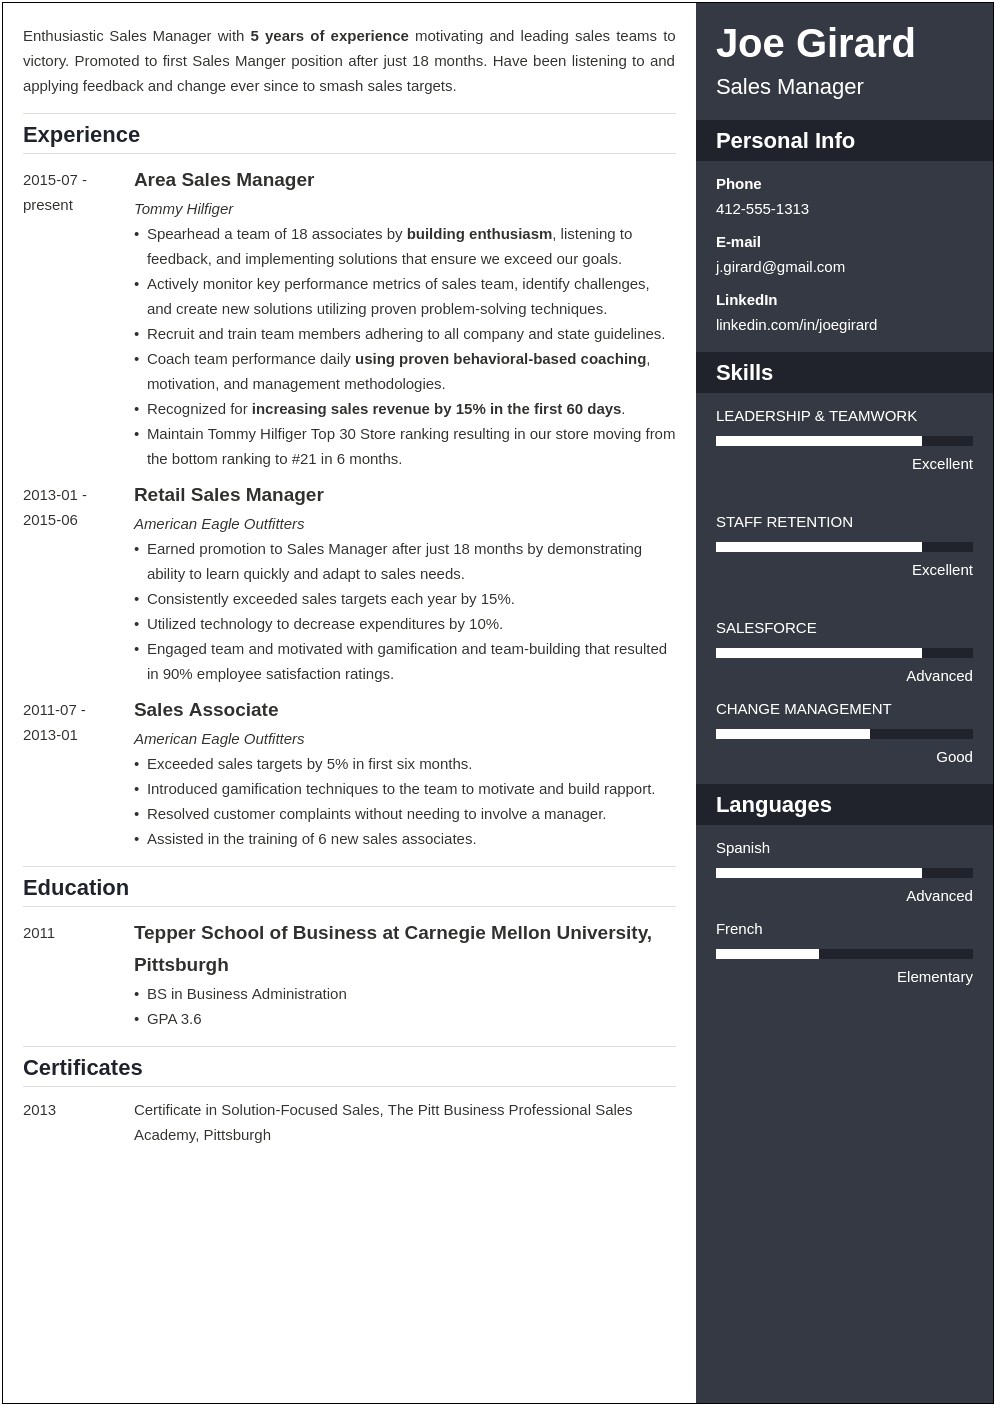 Sales Management Resume Objective Examples